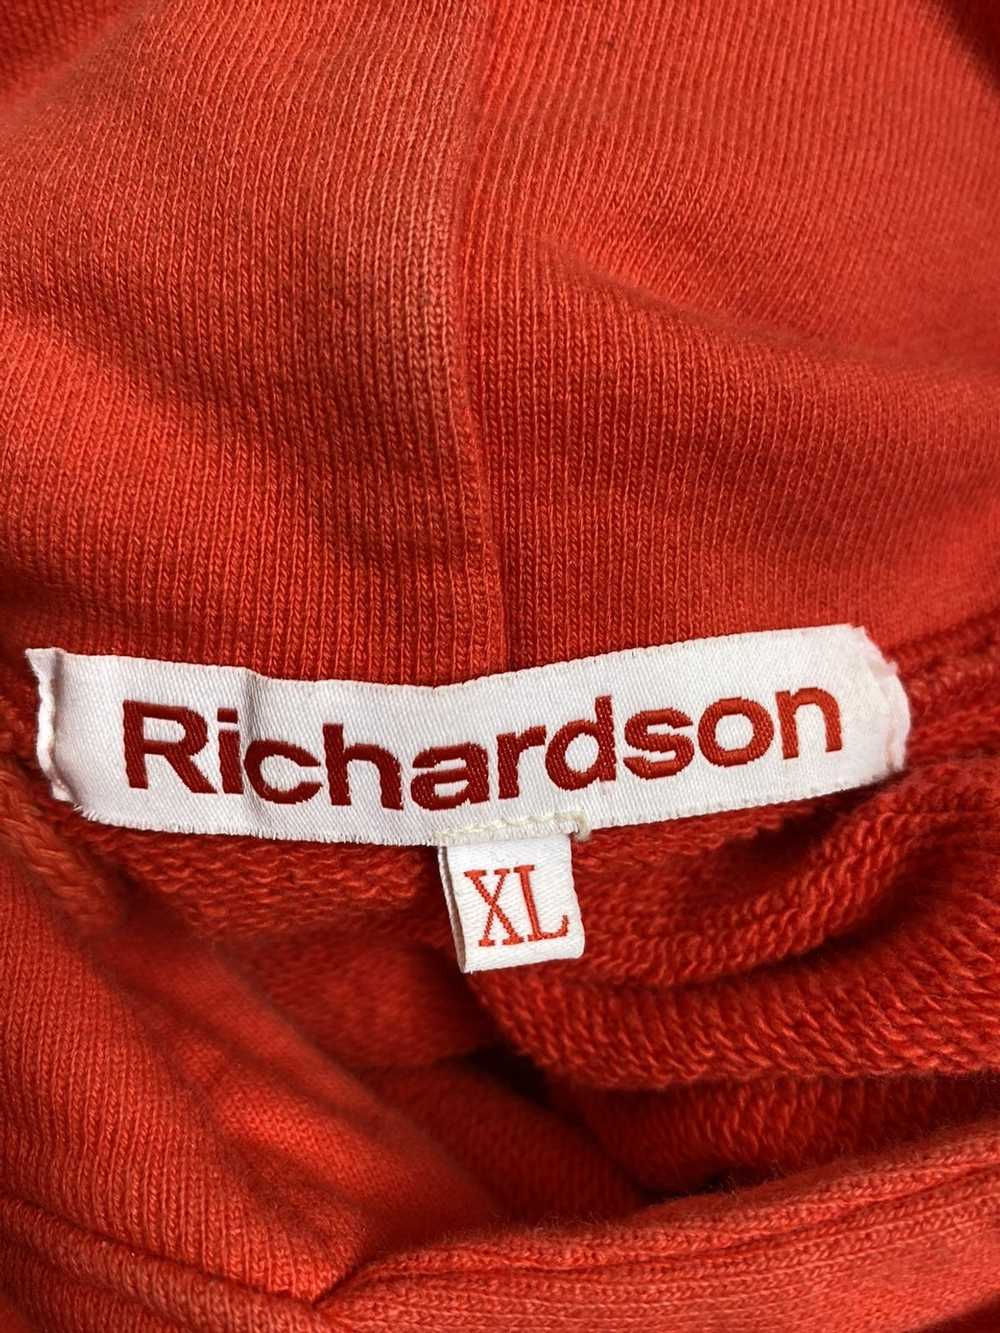 Richardson Wanted Pornstar Red Hoody - image 6